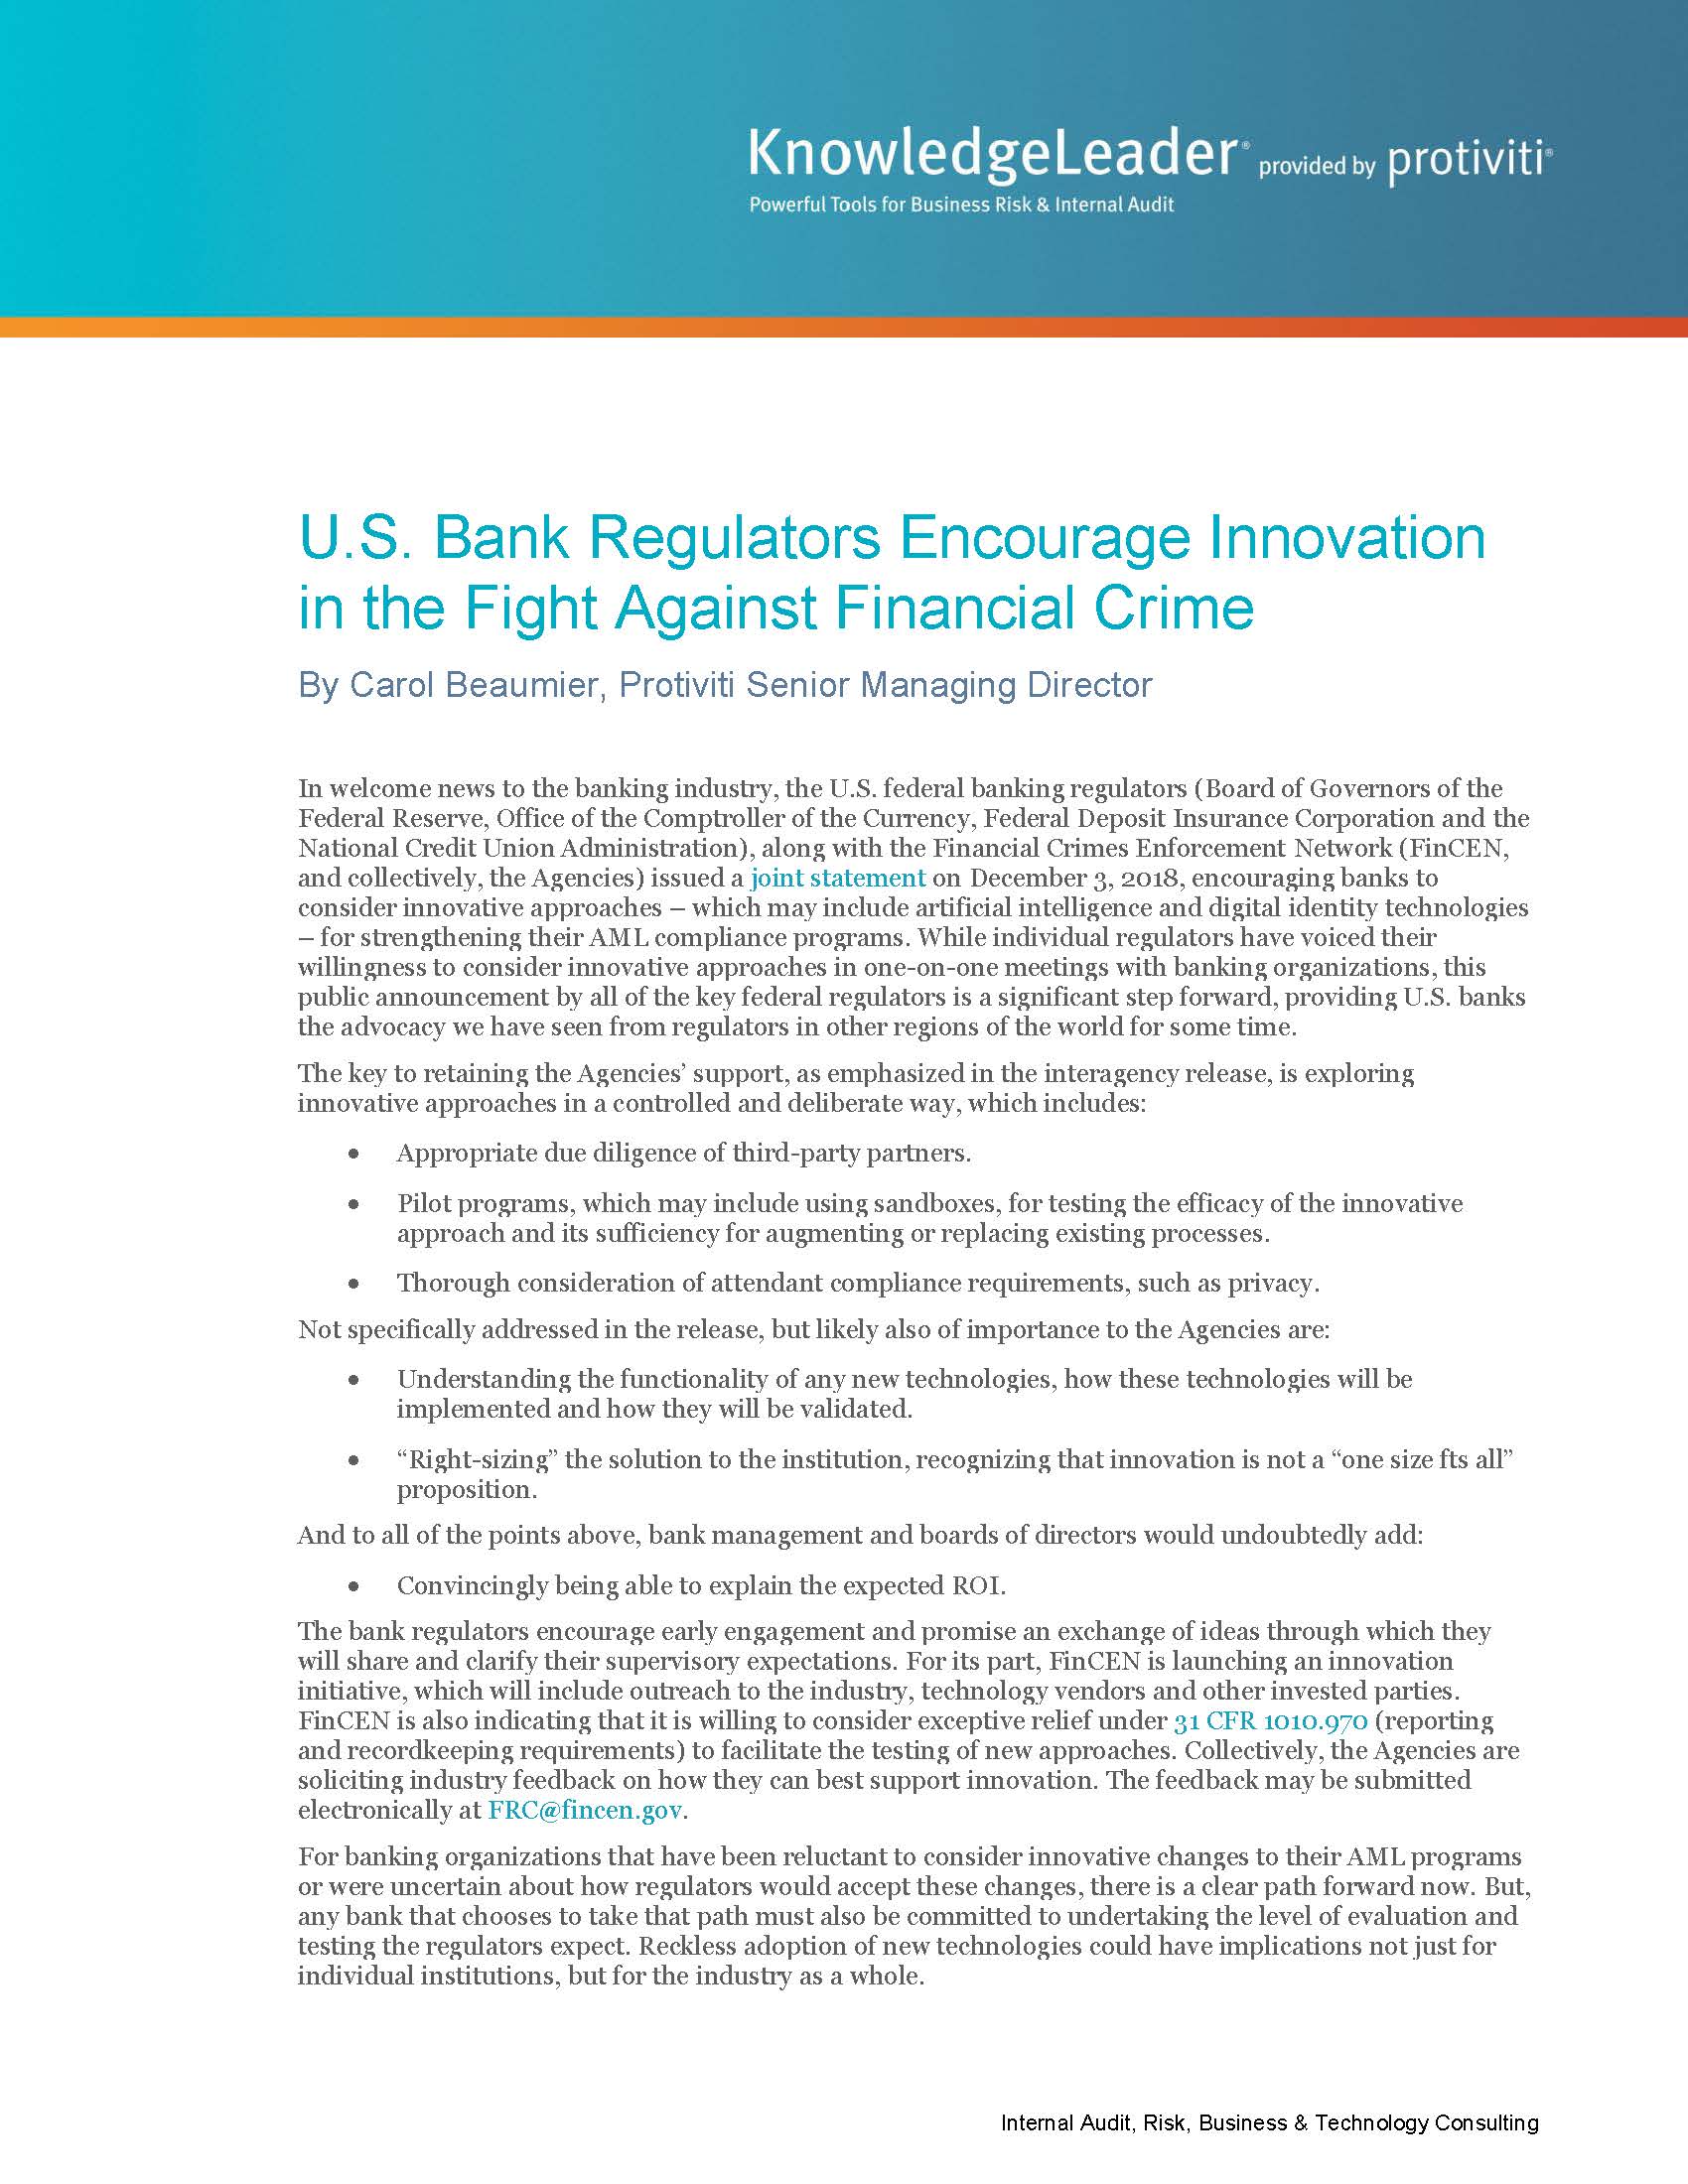 Screenshot of the first page of U.S. Bank Regulators Encourage Innovation in the Fight Against Financial Crime